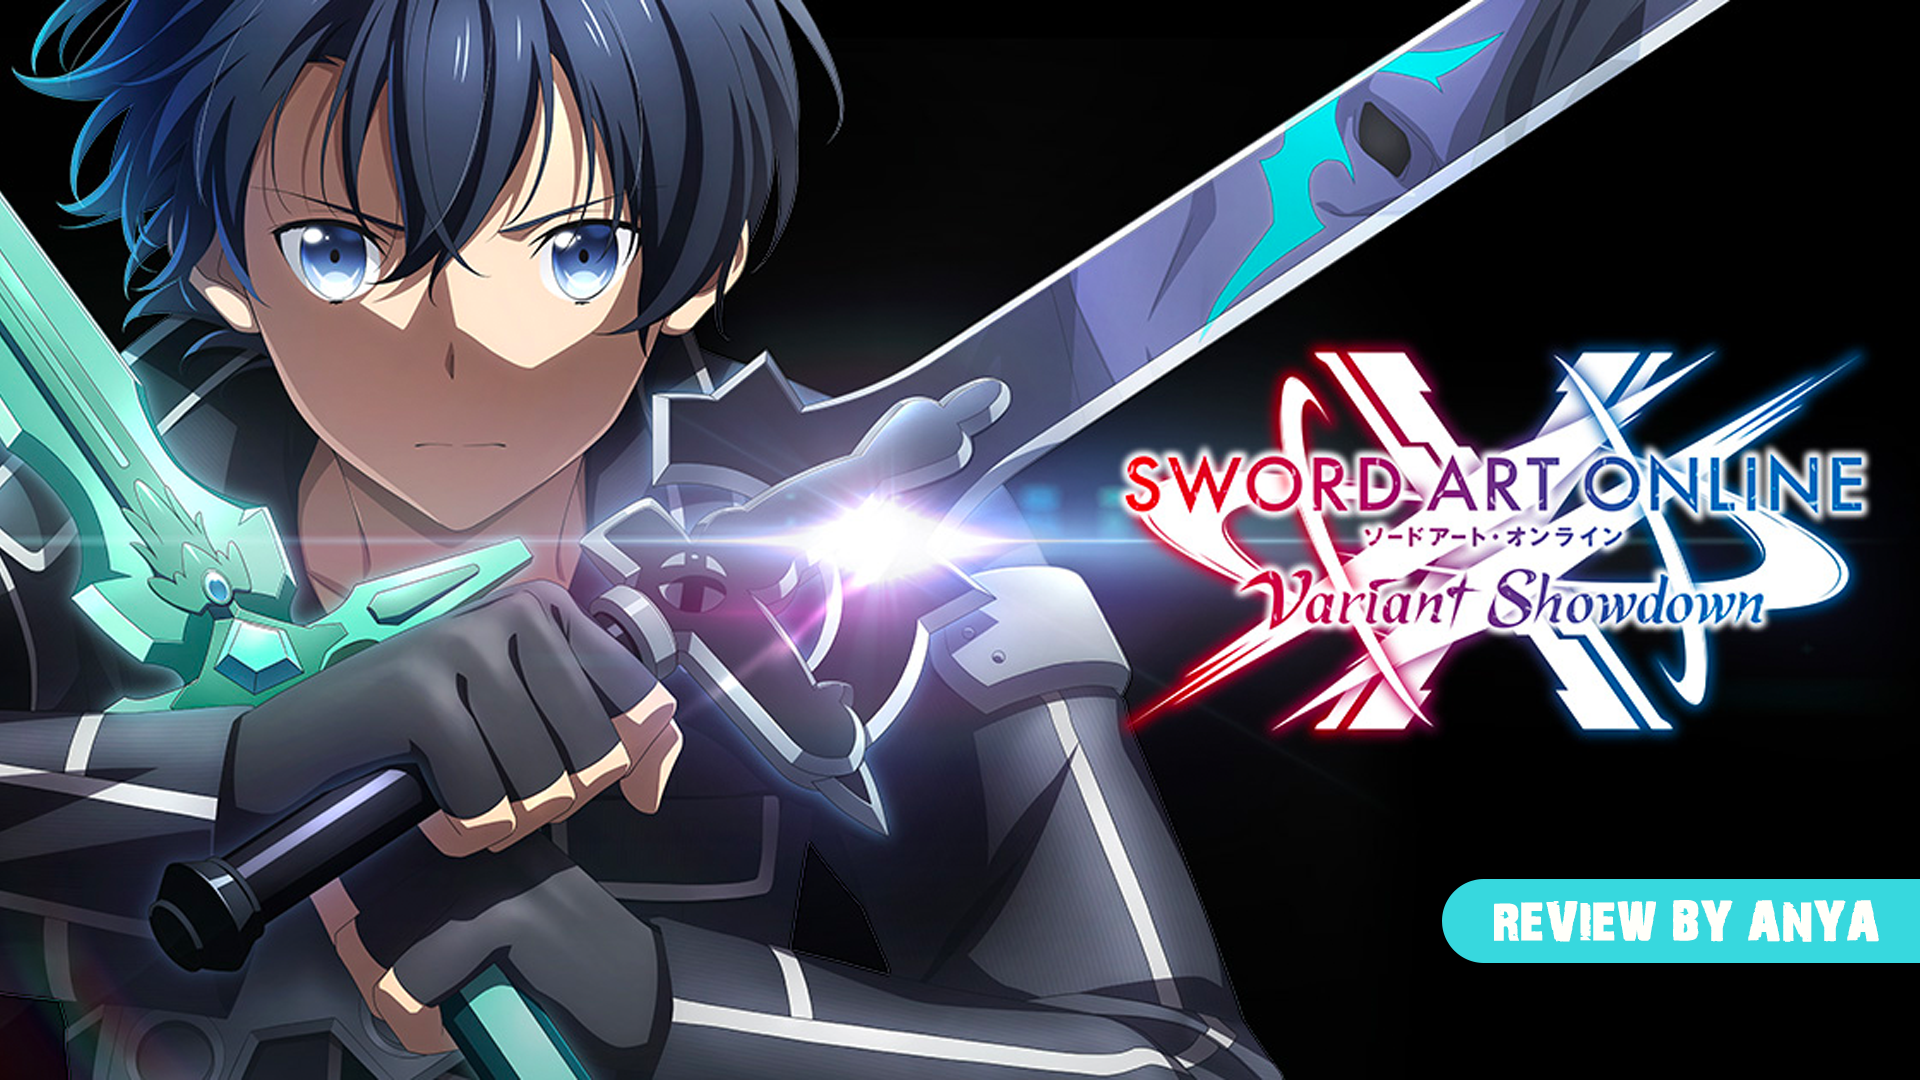 New Sword Art Online Game, Anime and Manga News Coming This Month